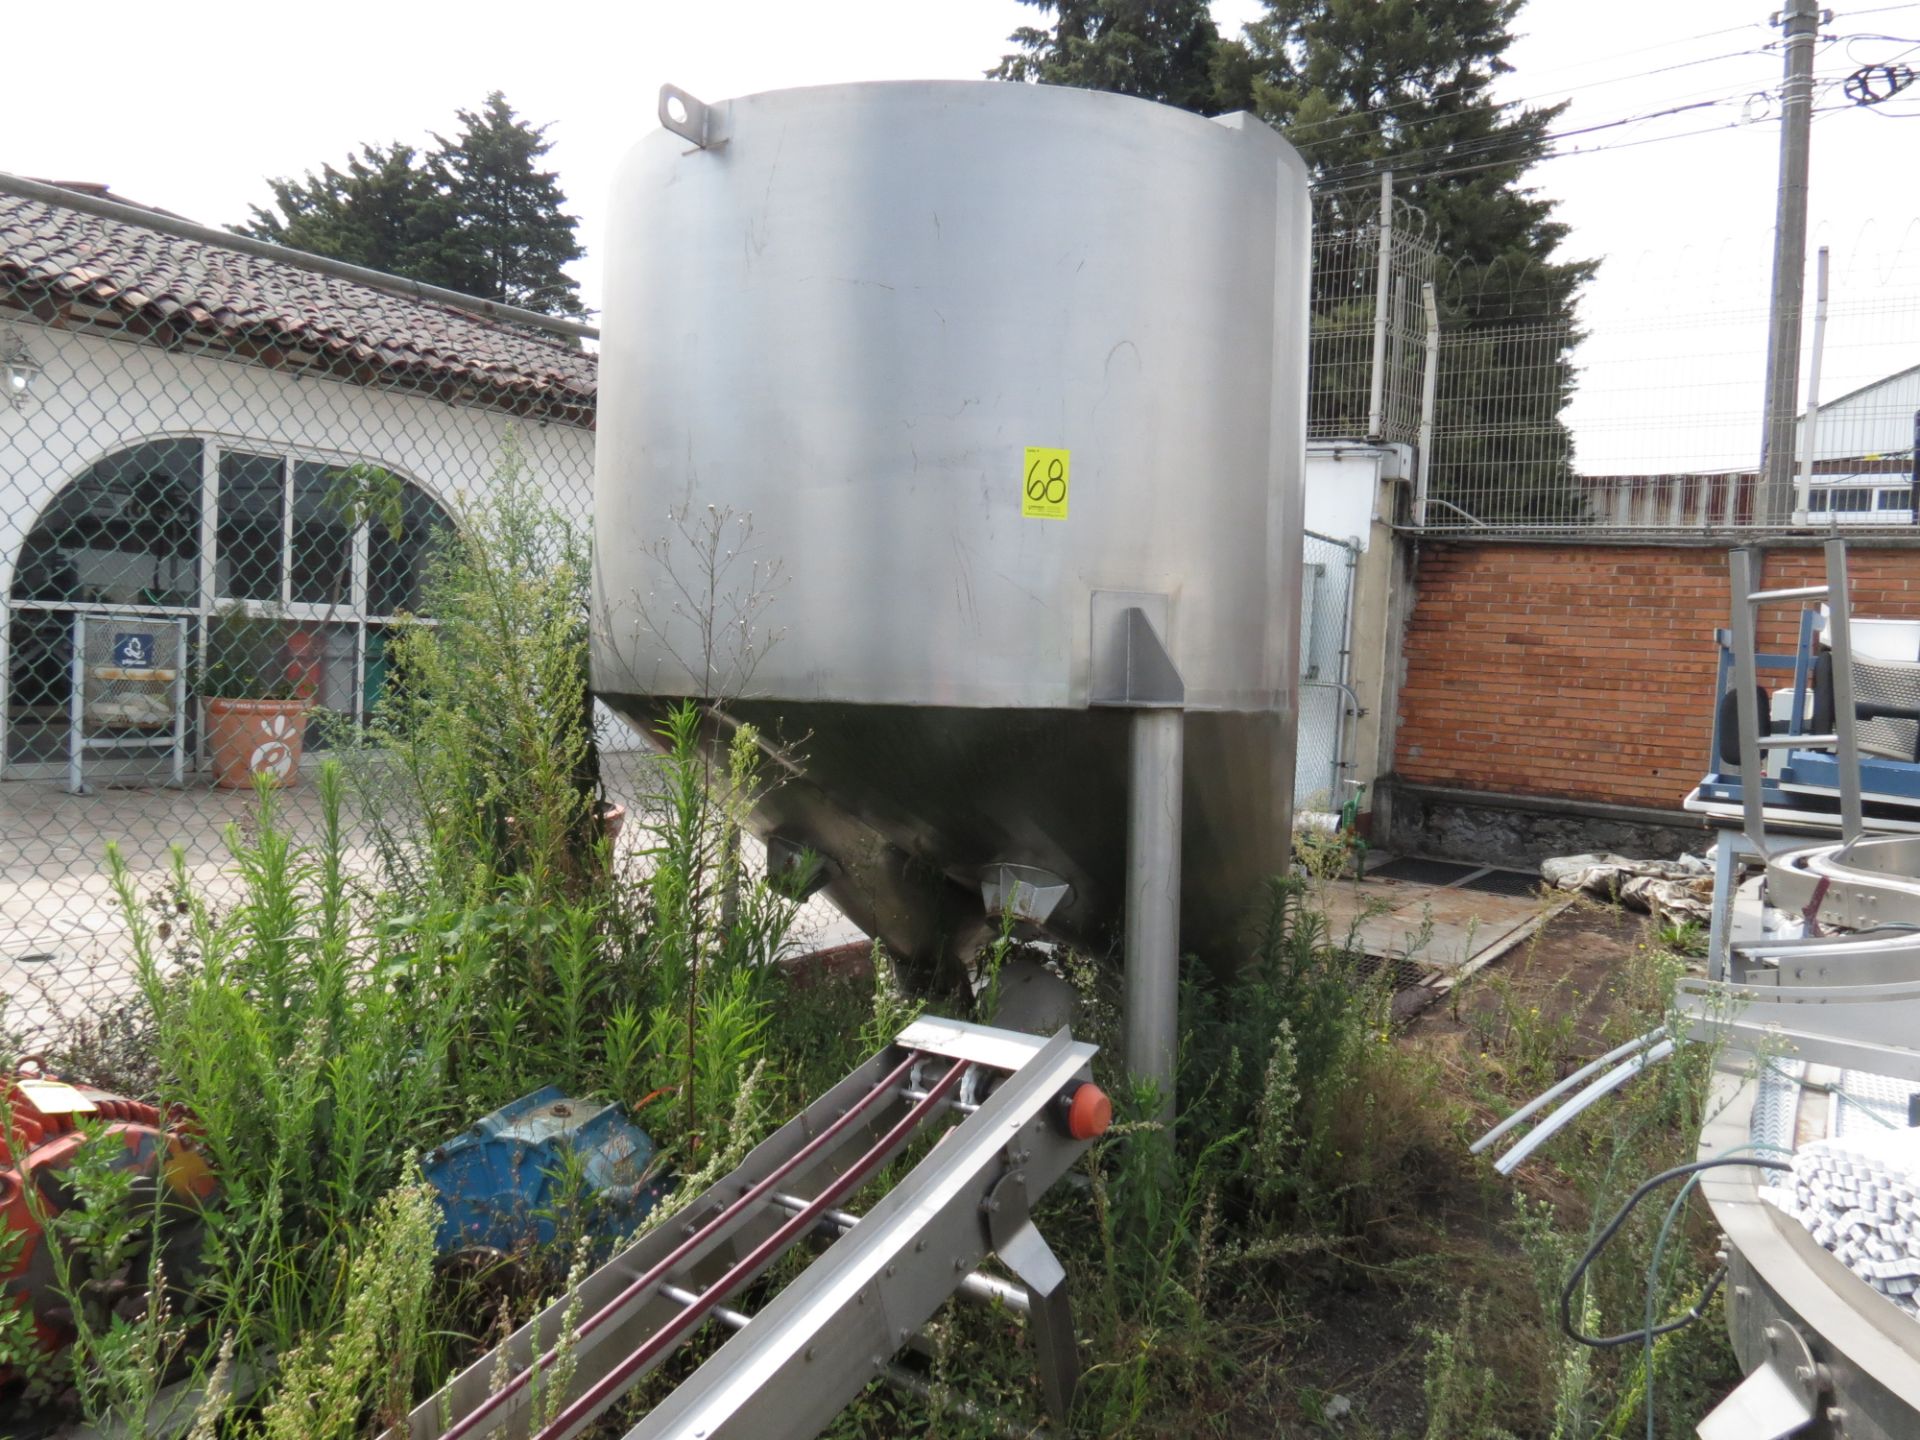 Stainless Steel Tank of 1.93 m in diameter, Includes Strong Parts conveyor belt. - Image 3 of 8